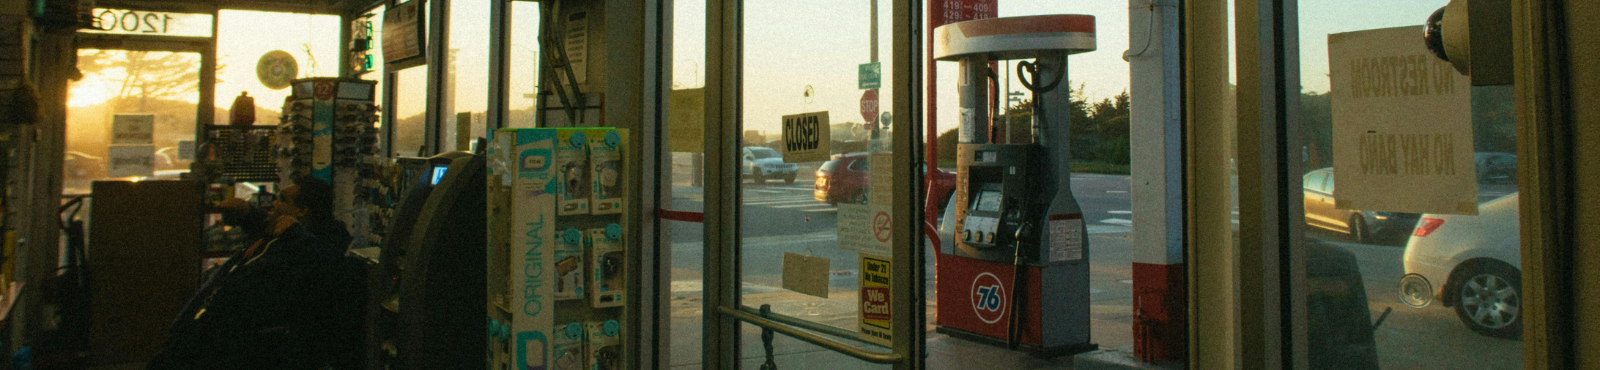 View of the inside of a Gas Station Store